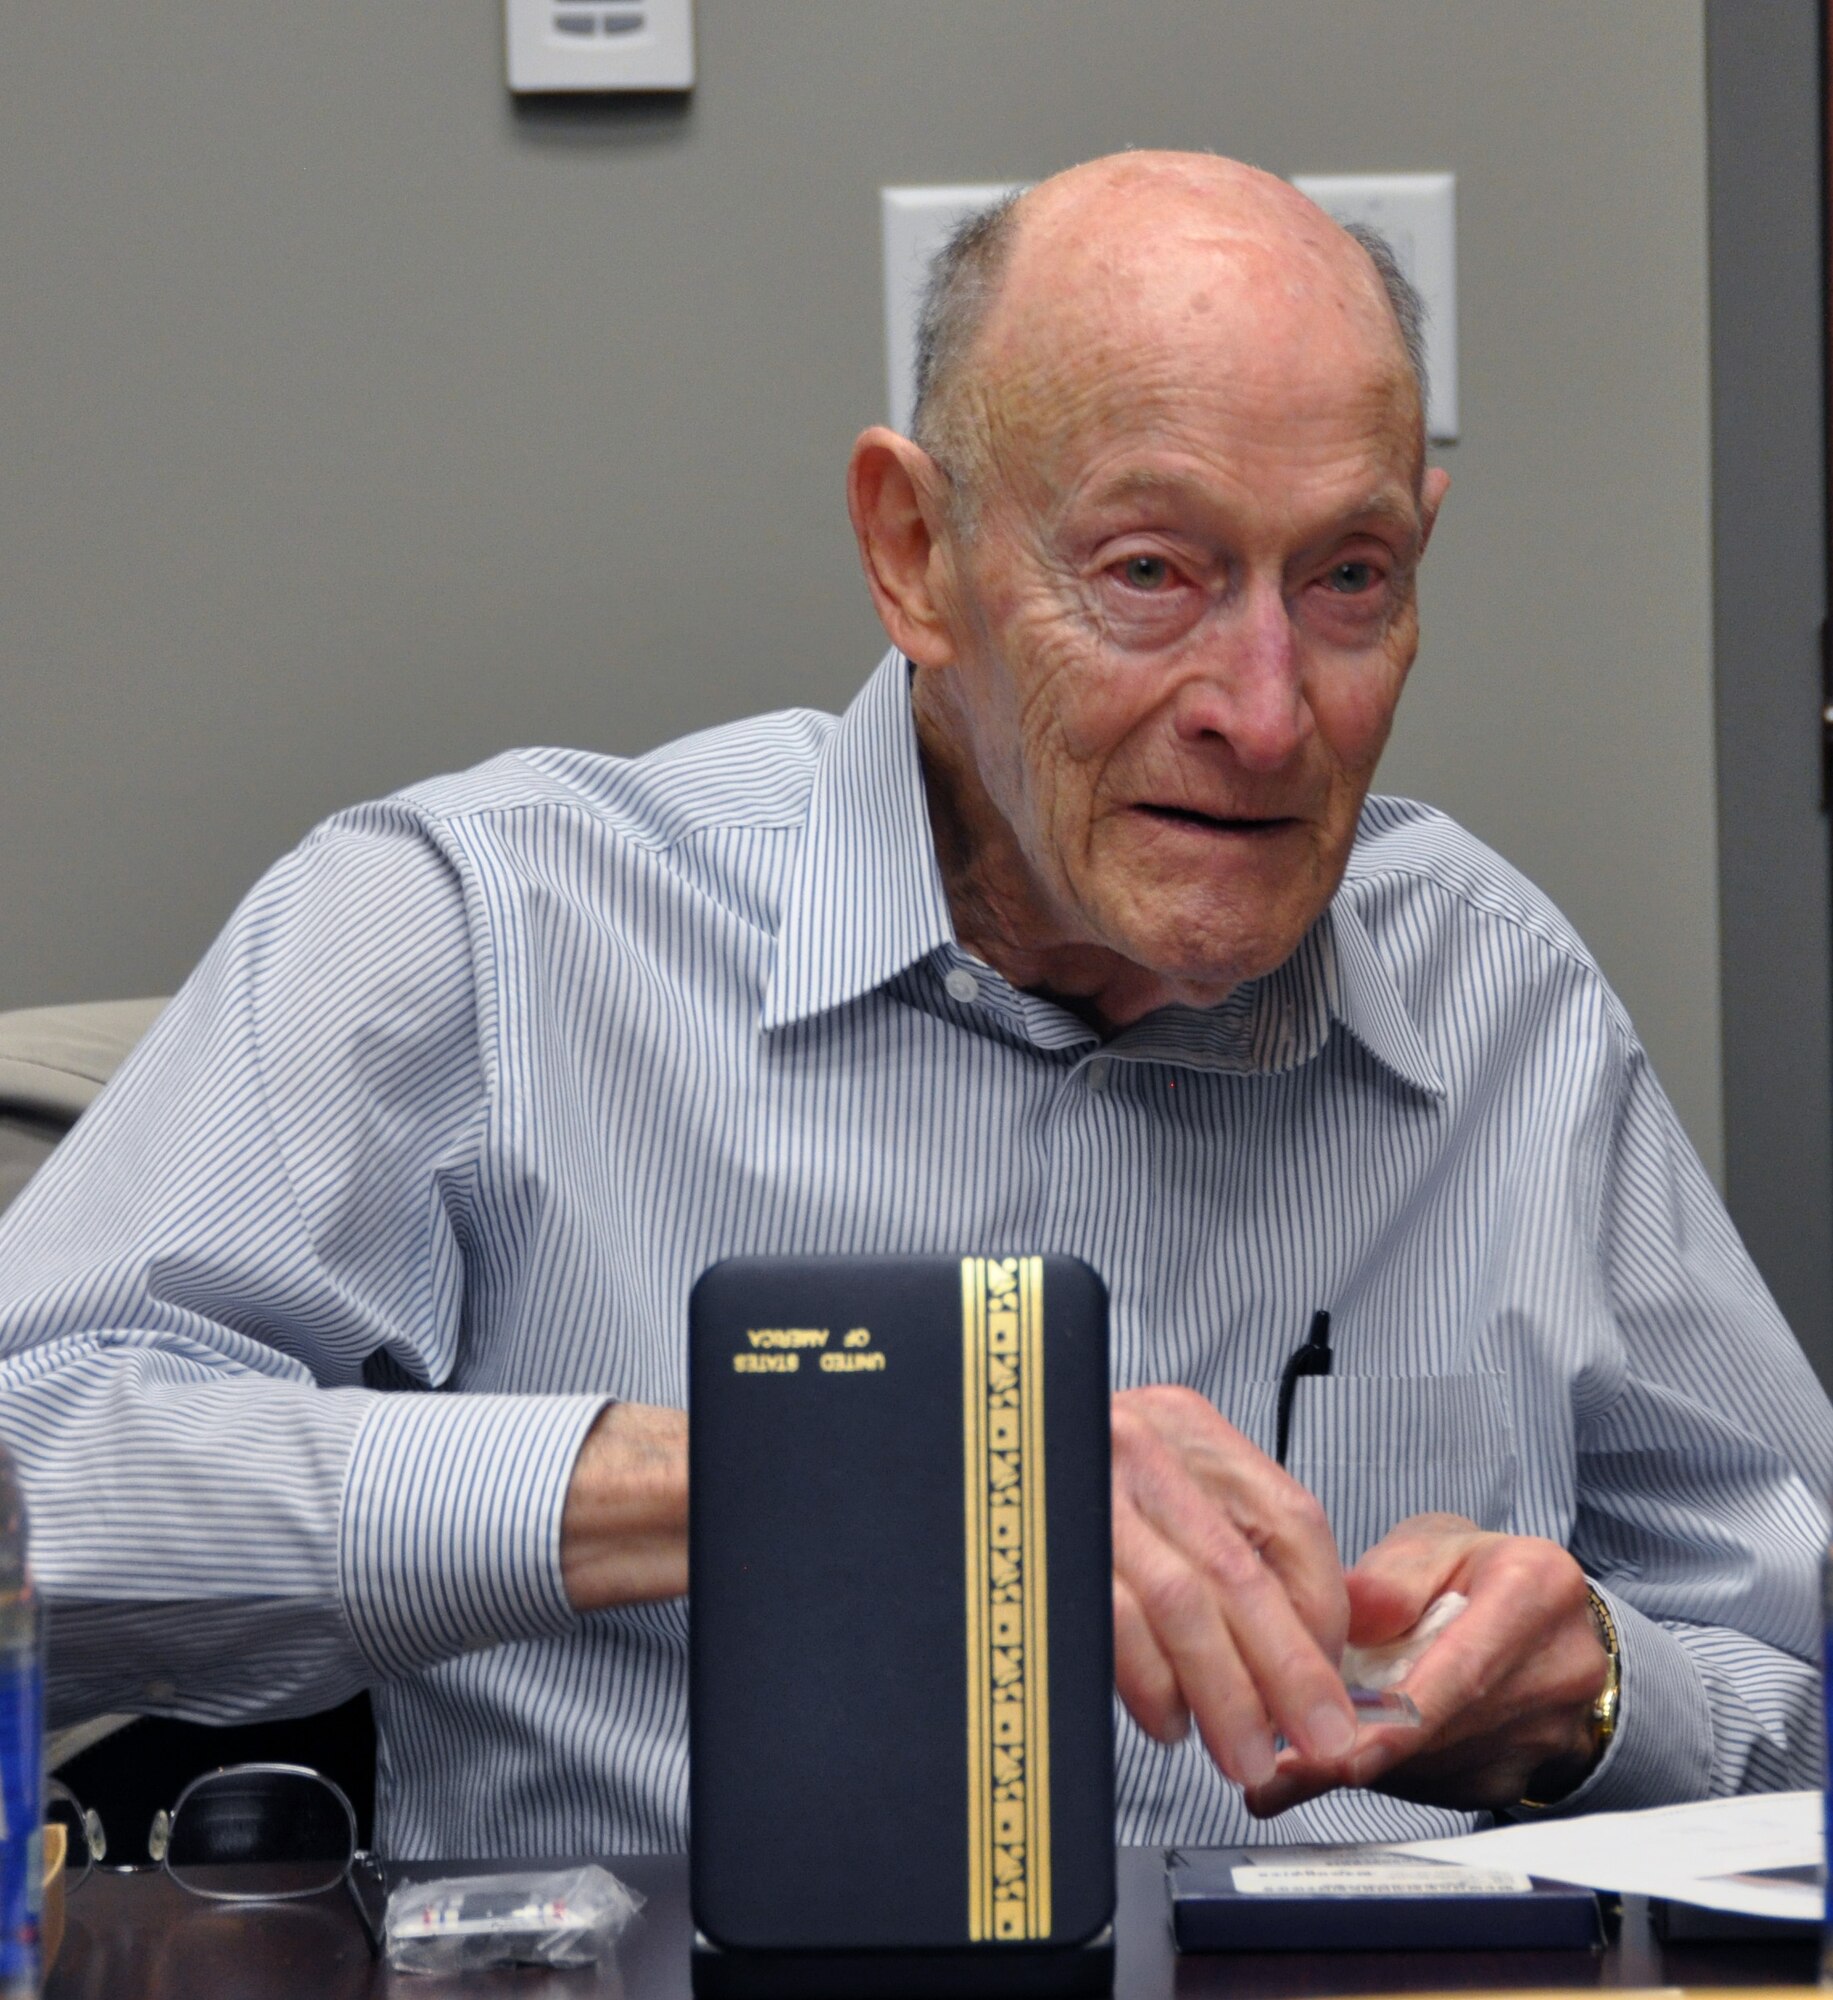 Former 1st Lt. Clayton A. Nattier, a veteran bomber pilot who was held as a prisoner of war during World War II, visited the Air Reserve Personnel Center to receive his POW Medal among various other medals, then took time to personally meet and thank the members on the recognition service team who assisted him April 17, 2015, on Buckley Air Force Base, Colo. Members from the ARPC recognition service team who assisted him are: retired Brig. Gen. Pat Quisenberry, evaluations branch chief, Jacqueline Bing, sustainment division chief, Master Sgt. Jeremy Bohn, pre-trained individual manpower division chief, and Master Sgt. Richard Grybos, NCO in charge of training and development. Nattier worked in conjunction with retired Lt. Col. Kathryn Wirkus, a constituent service representative from U.S. representative Ed Perlmutter’s staff, to attain his POW Medal. A formal presentation to award the POW Medal to Nattier is currently being planned by U.S. representative Ed Perlmutter’s office. (U.S. Air Force photo/Tech. Sgt. Rob Hazelett)